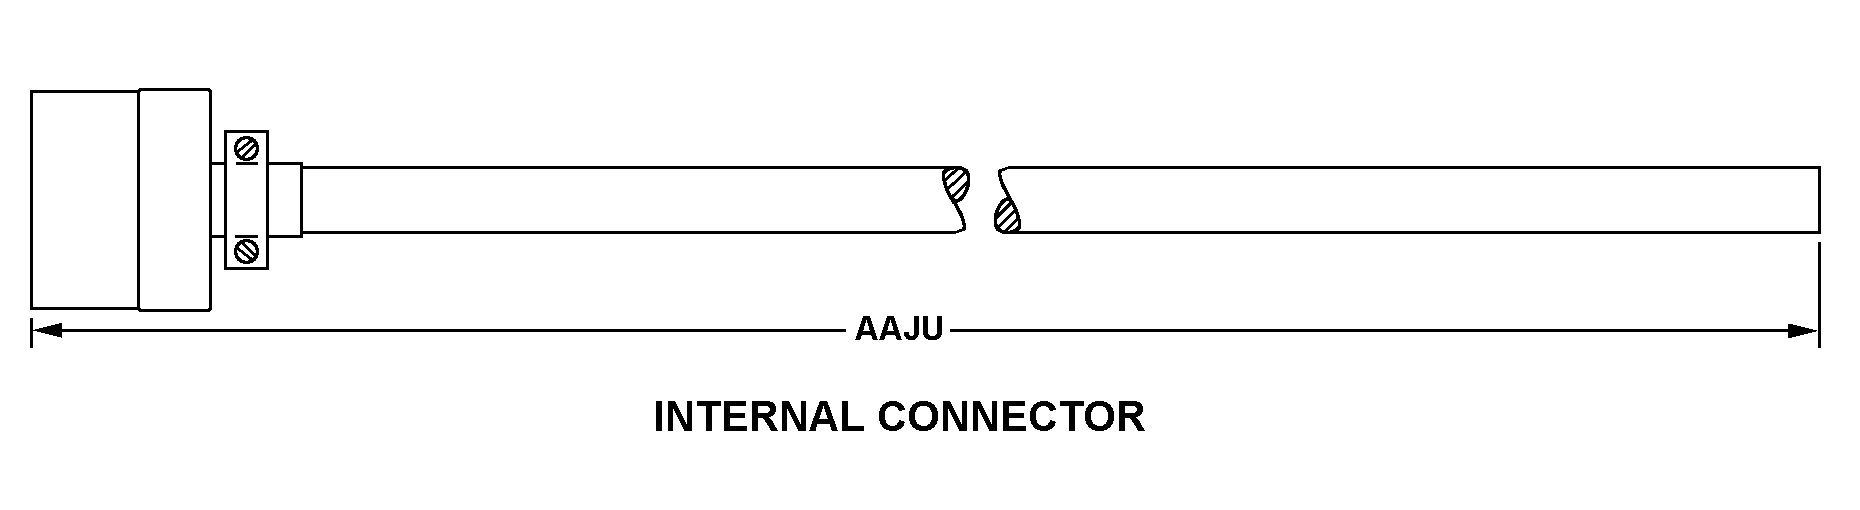 INTERNAL CONNECTOR style nsn 5995-01-042-3838